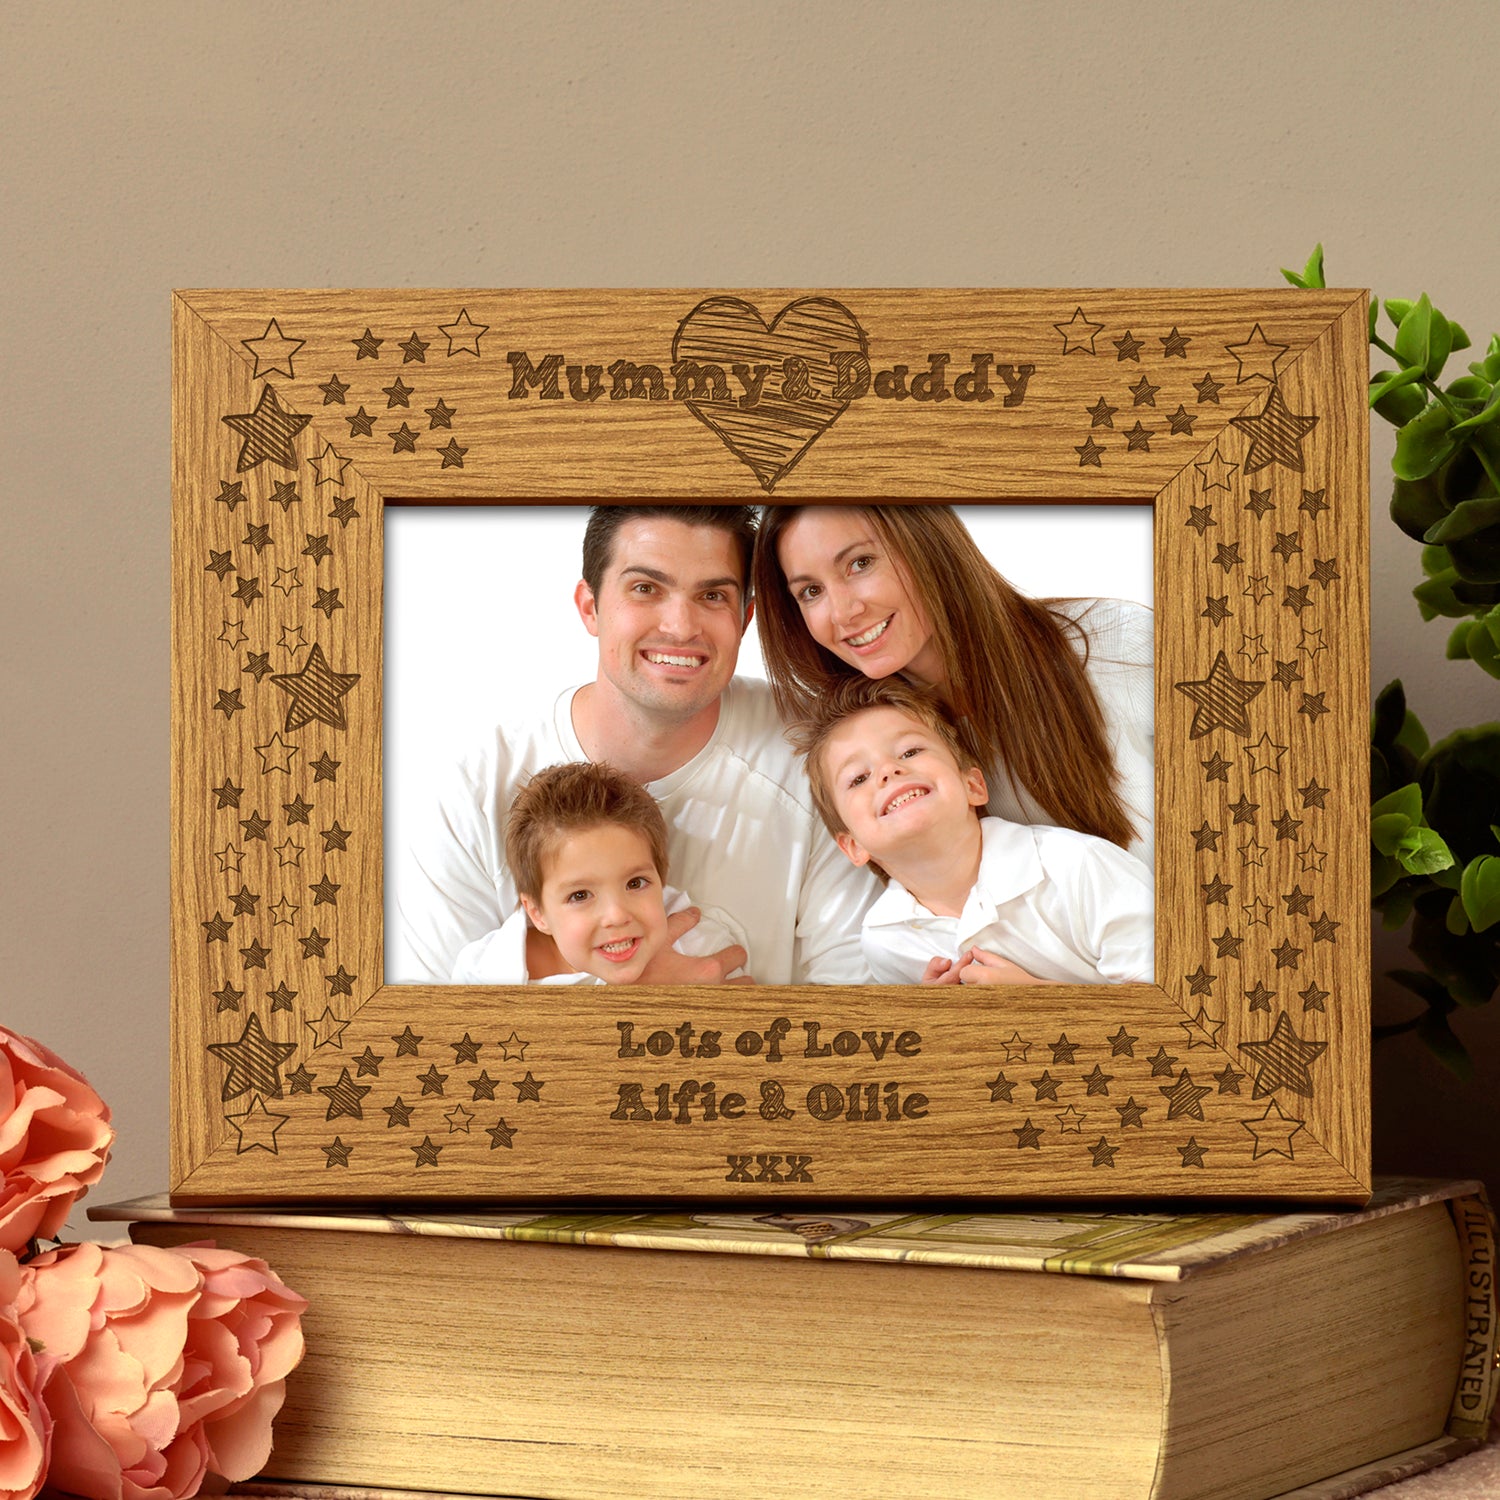 Personalised Mummy & Daddy Photo Frame Star and Heart Design - ukgiftstoreonline